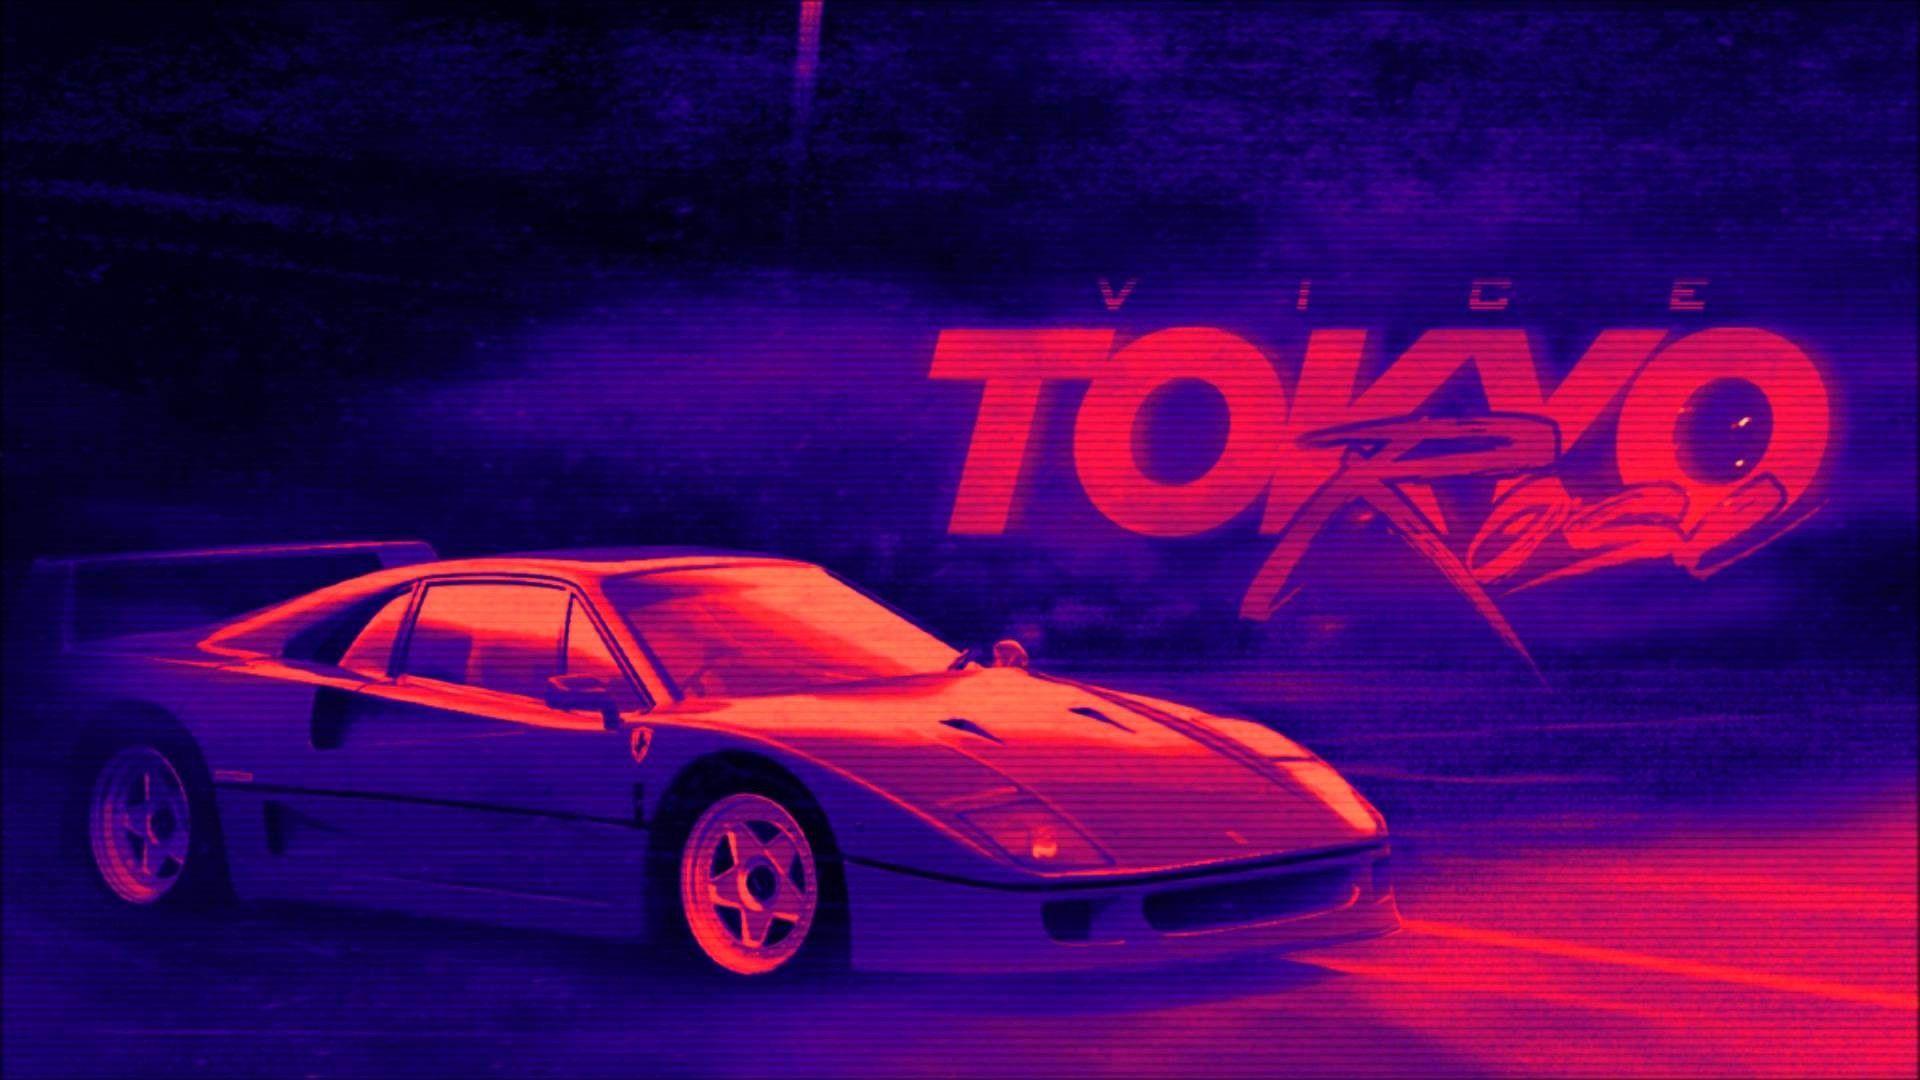 80s Retro Car Wallpapers - Top Free 80s Retro Car Backgrounds